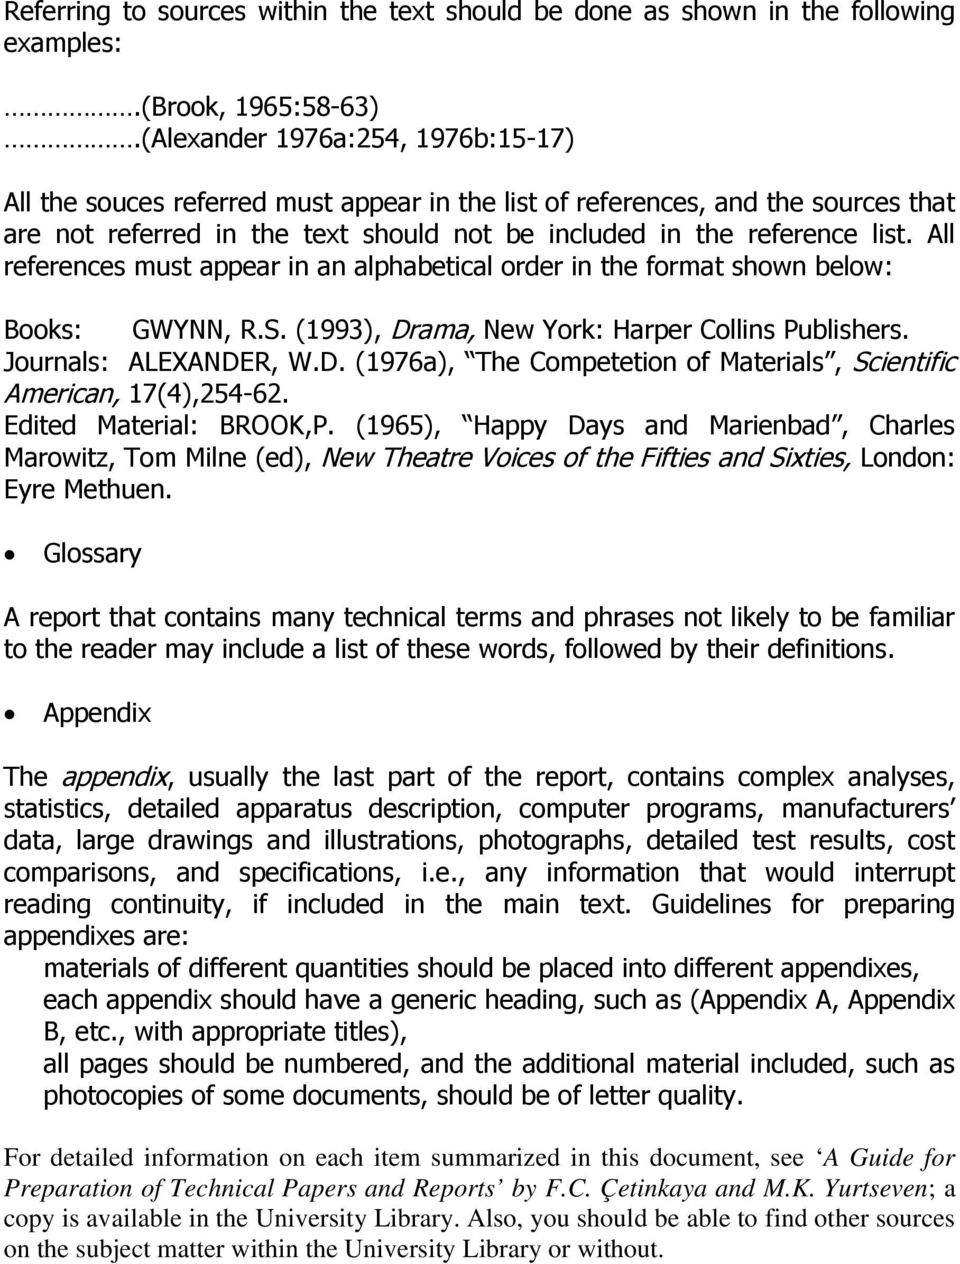 All references must appear in an alphabetical order in the format shown below: Books: GWYNN, R.S. (1993), Drama, New York: Harper Collins Publishers. Journals: ALEXANDER, W.D. (1976a), The Competetion of Materials, Scientific American, 17(4),254-62.